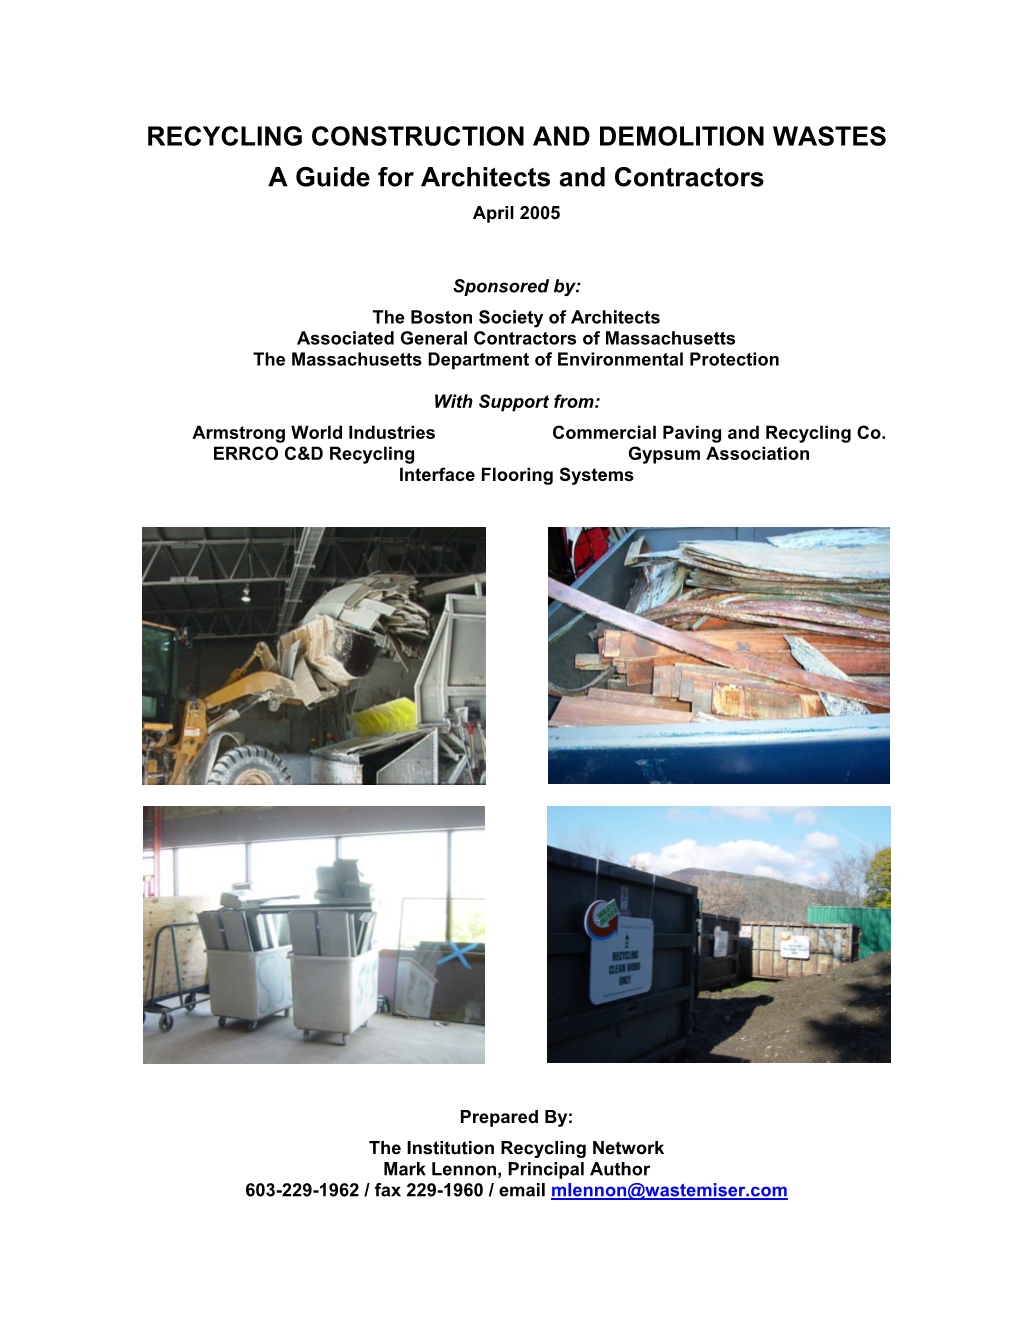 Recycling Construction and Demolition Wastes: a Guide for Architects and Contractors